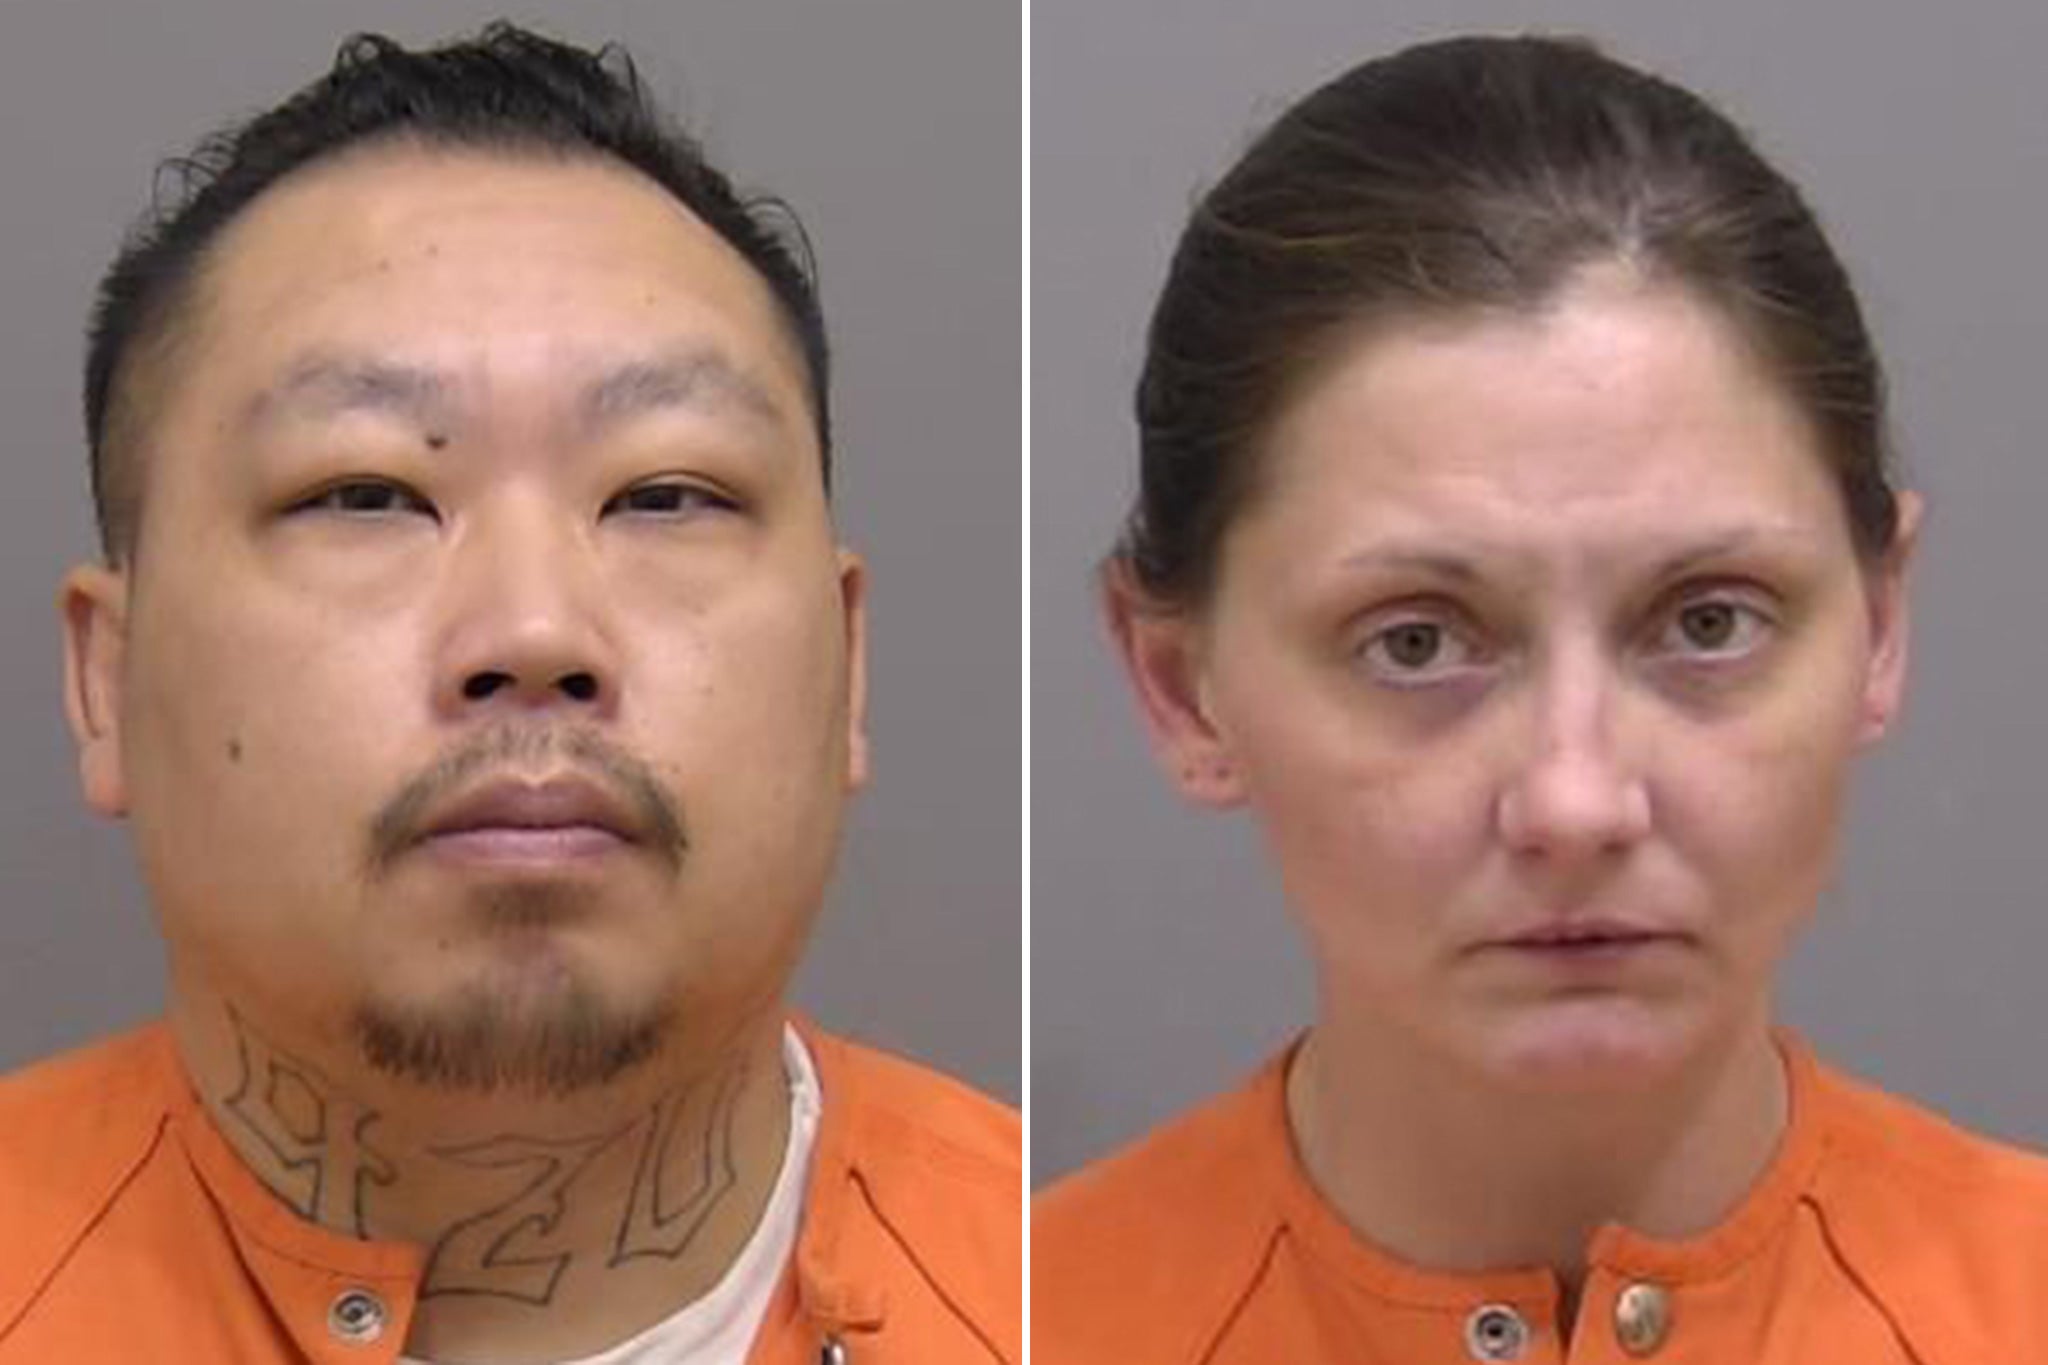 Jesse Vang and Katrina Baur are both being held on chronic child neglect charges